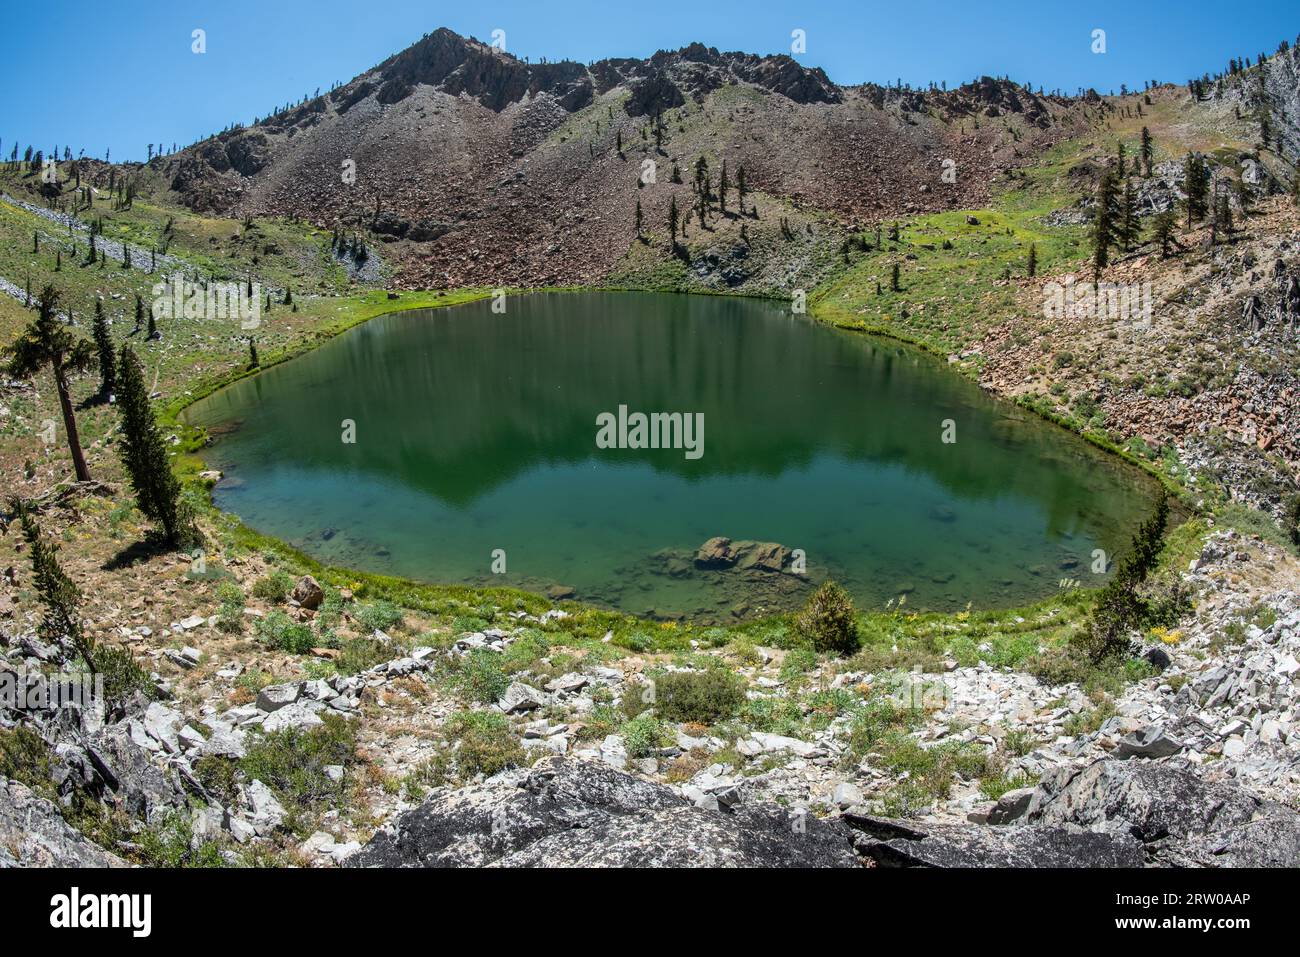 A high elevation montane lake in the Trinity alps wilderness in Northern California. Stock Photo